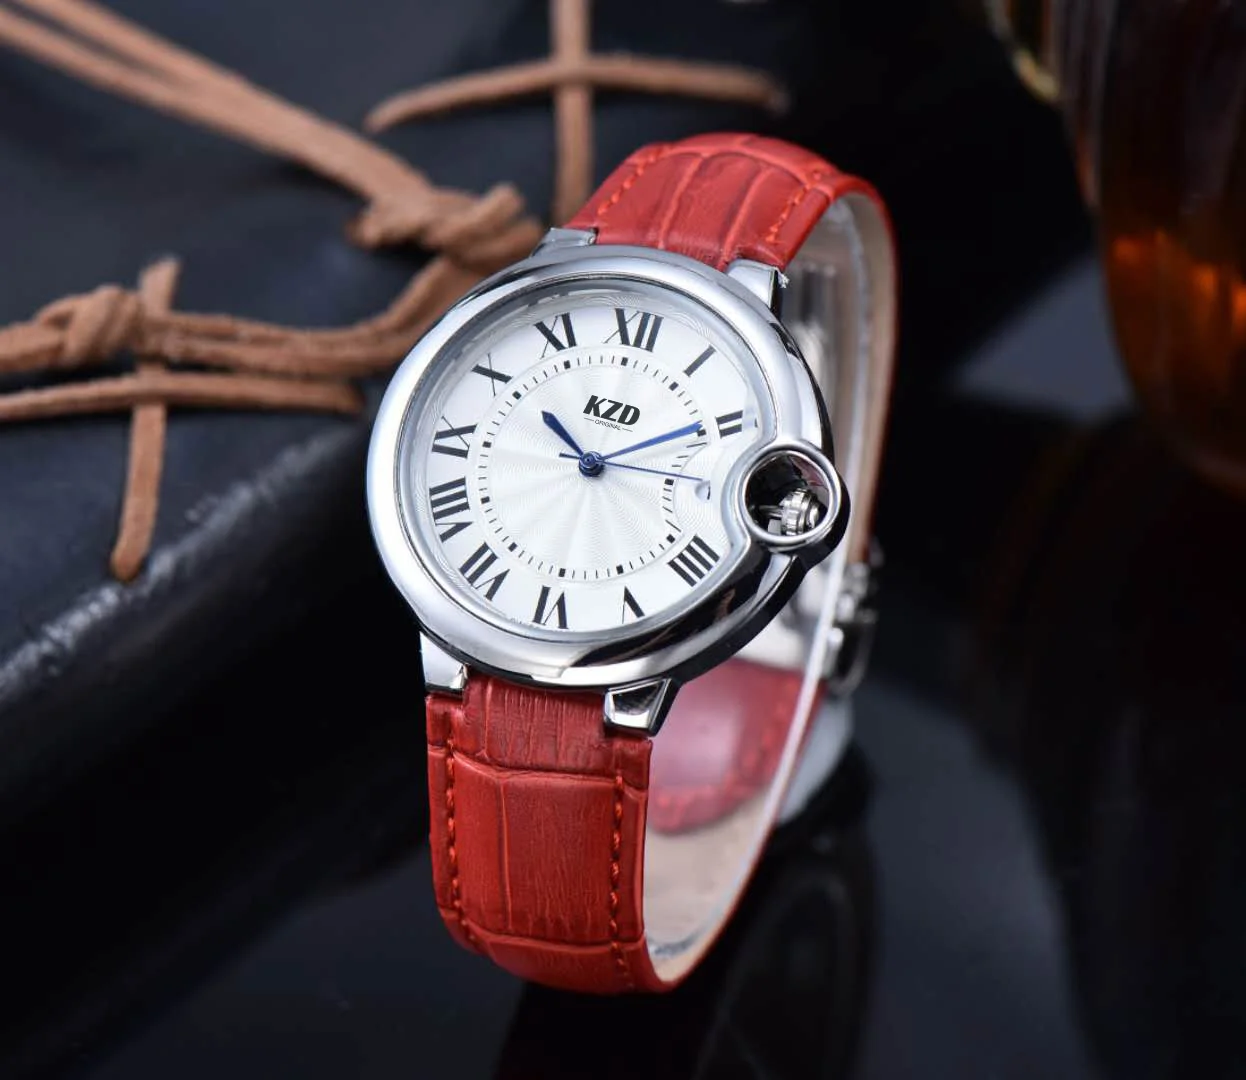 Original Brand Design High-end Ladies Exquisite Watch Quartz Movement Leather Waterproof AAA Clock Valentine's Day Recommended enlarge